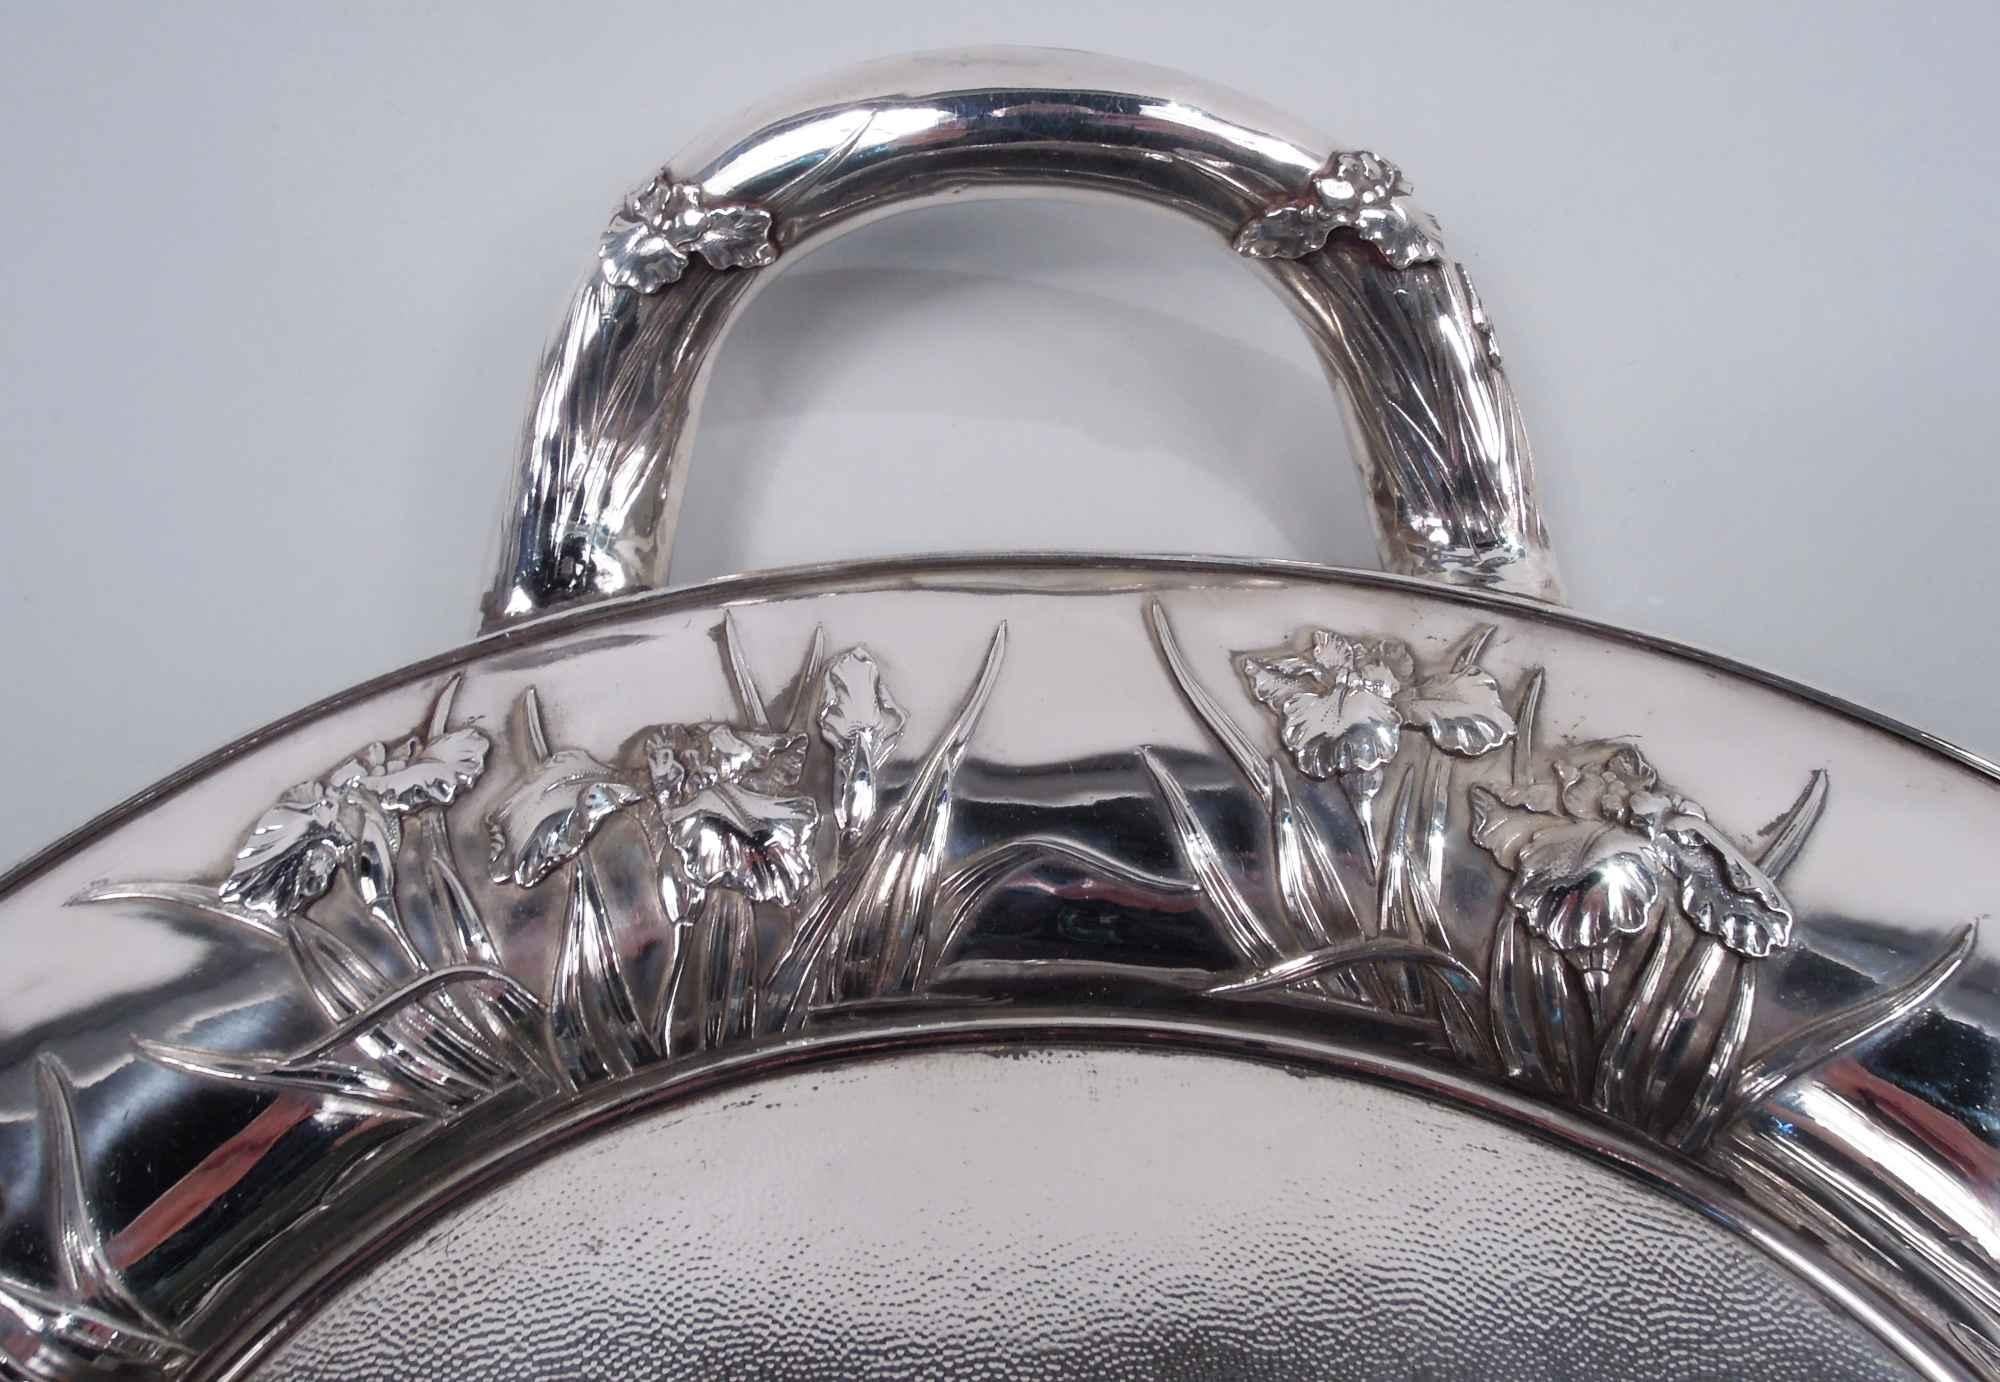 Japanese Meiji Art Nouveau silver tea tray, ca 1890. Retailed by Arthur & Bond in Yokohama. Lobed oval. Well stippled and engraved with shaded interlaced monogram. Upturned c-scroll end handles. Blossoming prunus branches, iris flowers, and bamboo